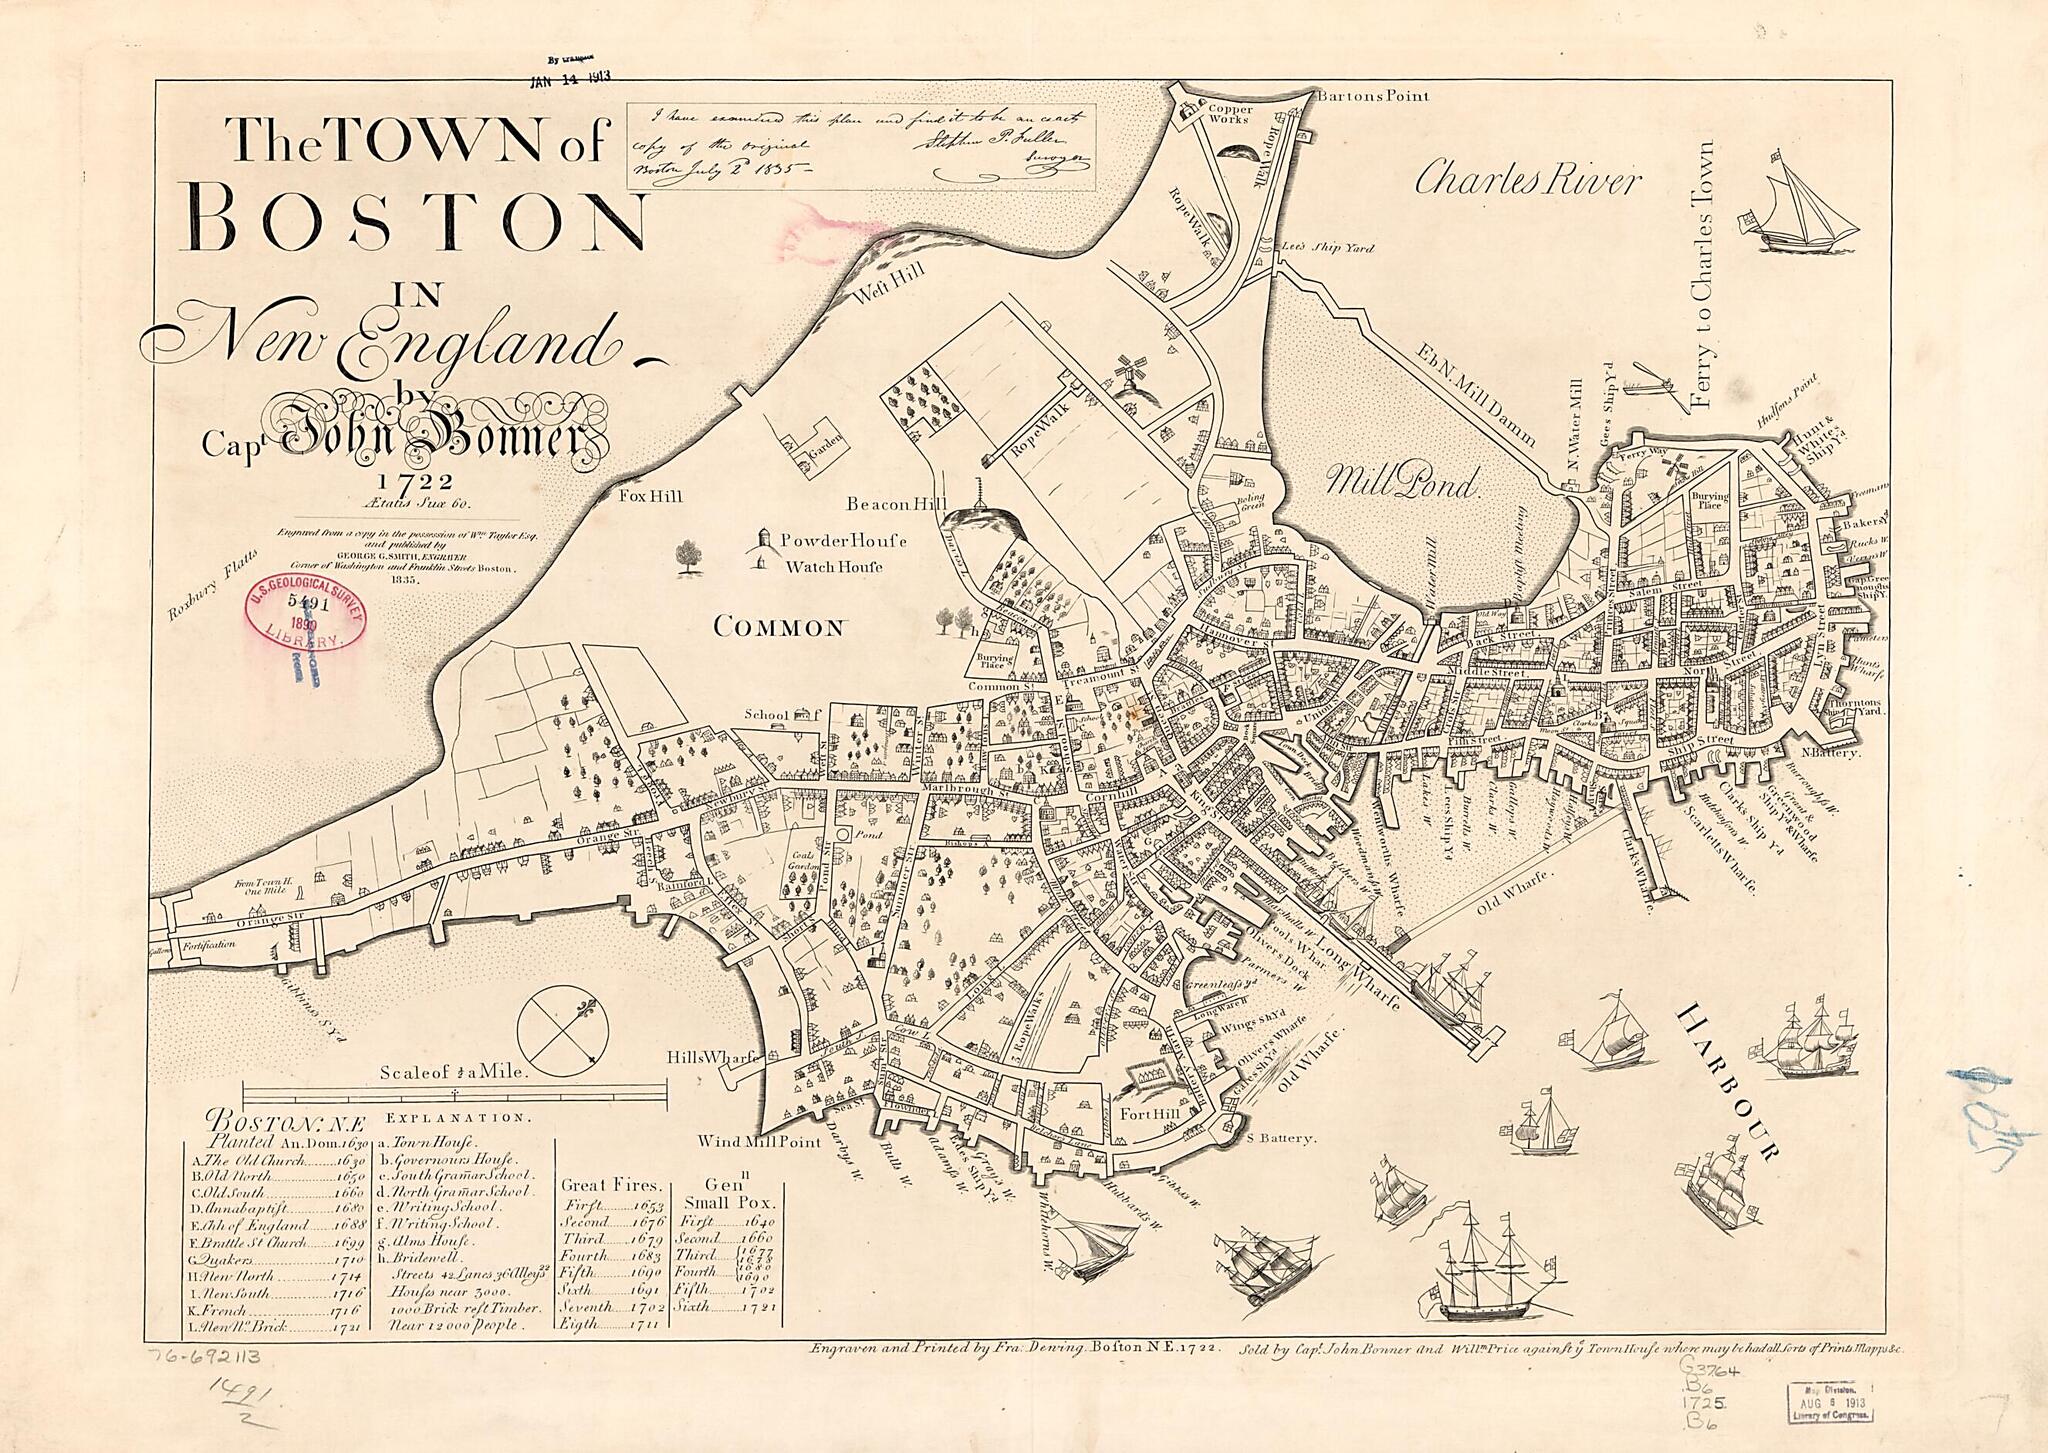 This old map of The Town of Boston In New England from 1835 was created by John Bonner, Francis Dewing, Stephen P. Fuller, William Price, George Girdler Smith in 1835